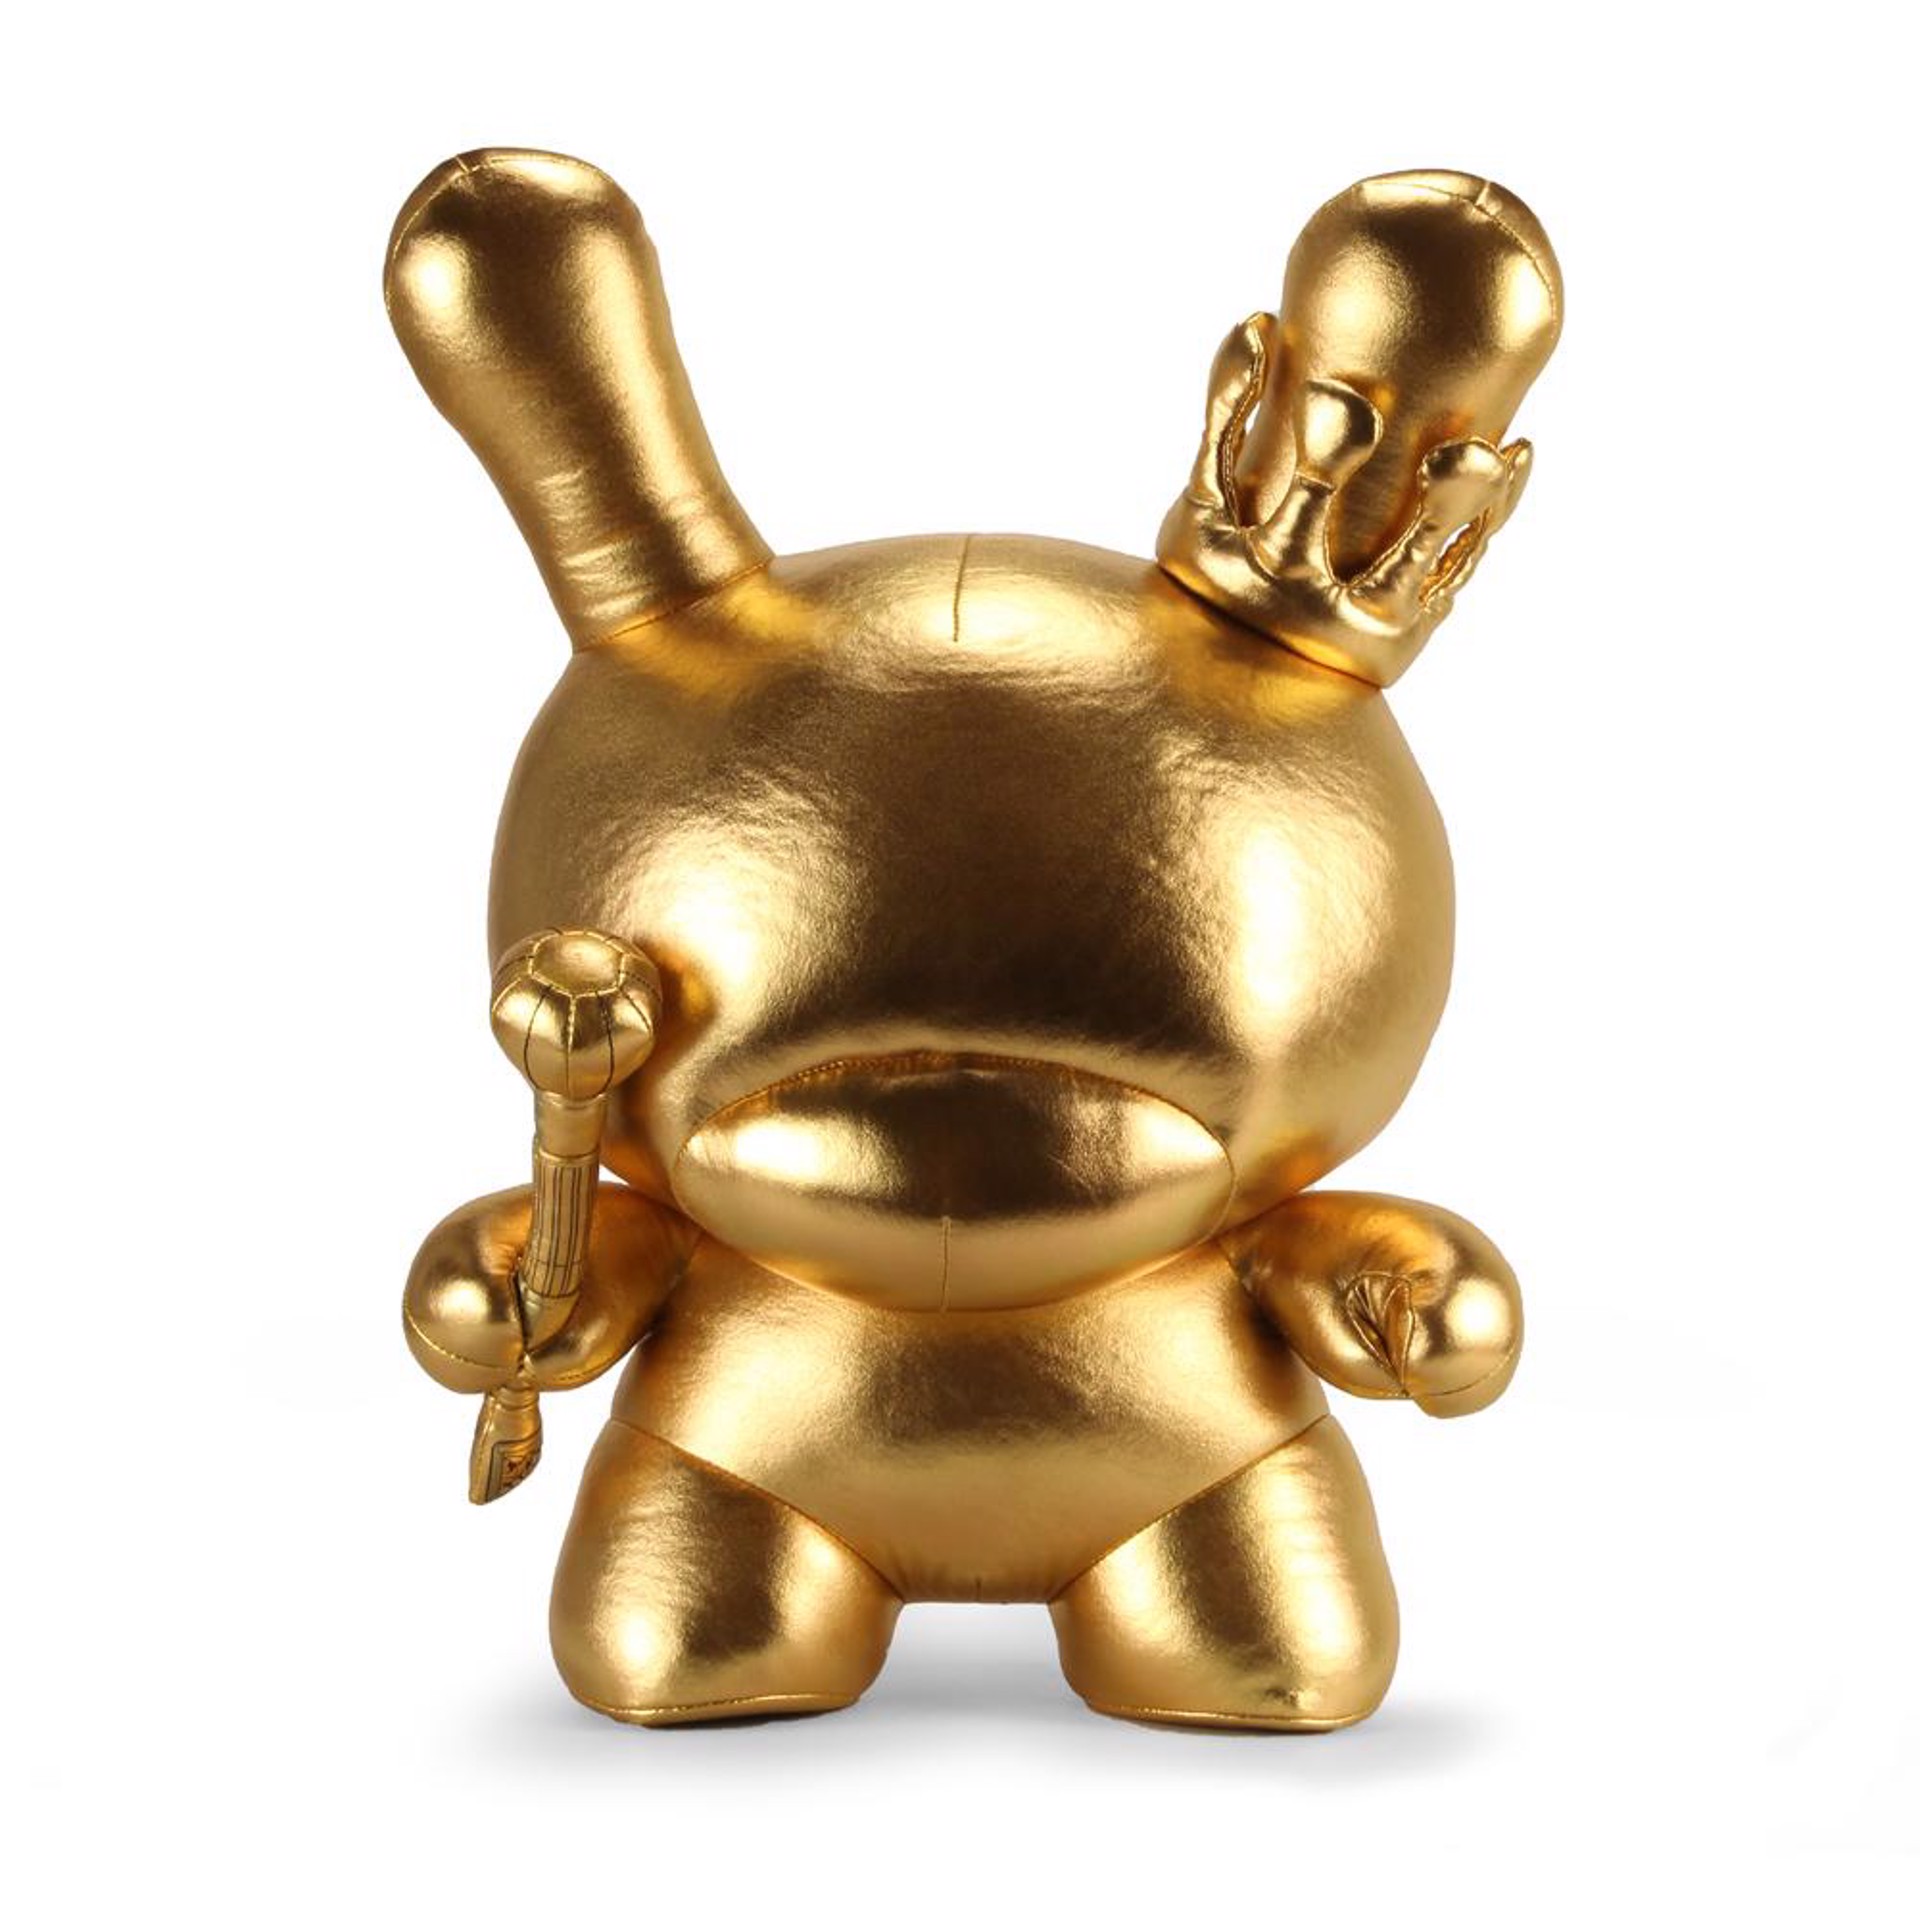 Gold King 20" Plush Dunny by Tristan Eaton